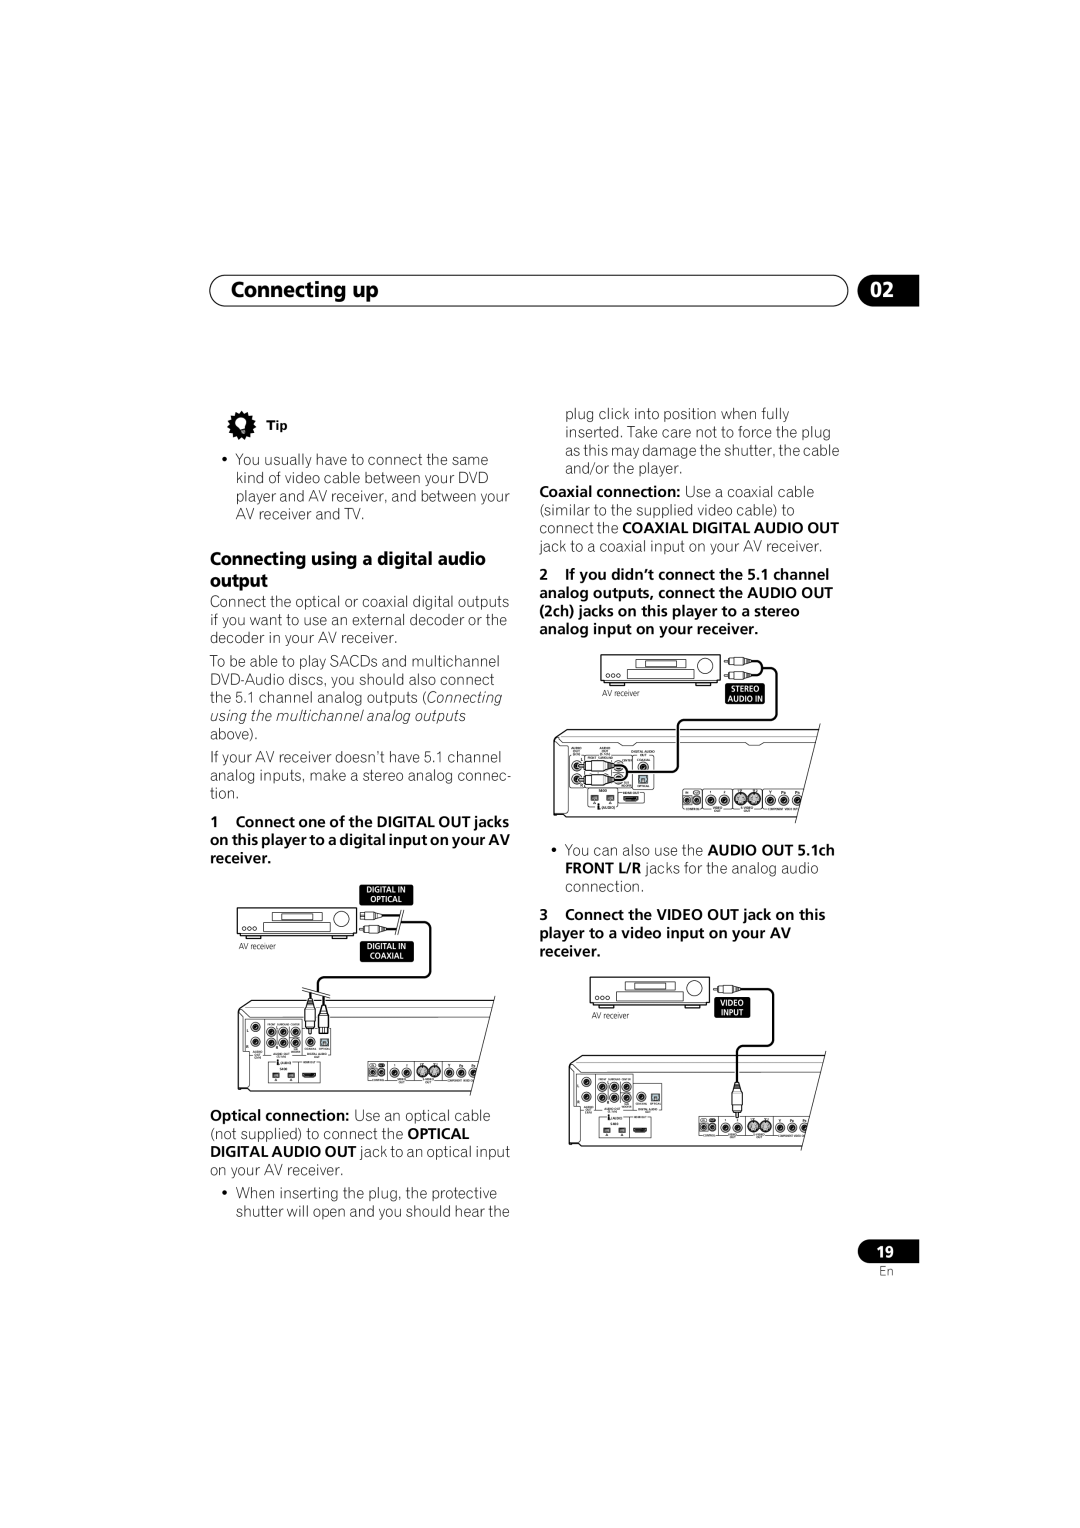 Pioneer DV-79AVi-s operating instructions Connecting using a digital audio output, Connecting up 